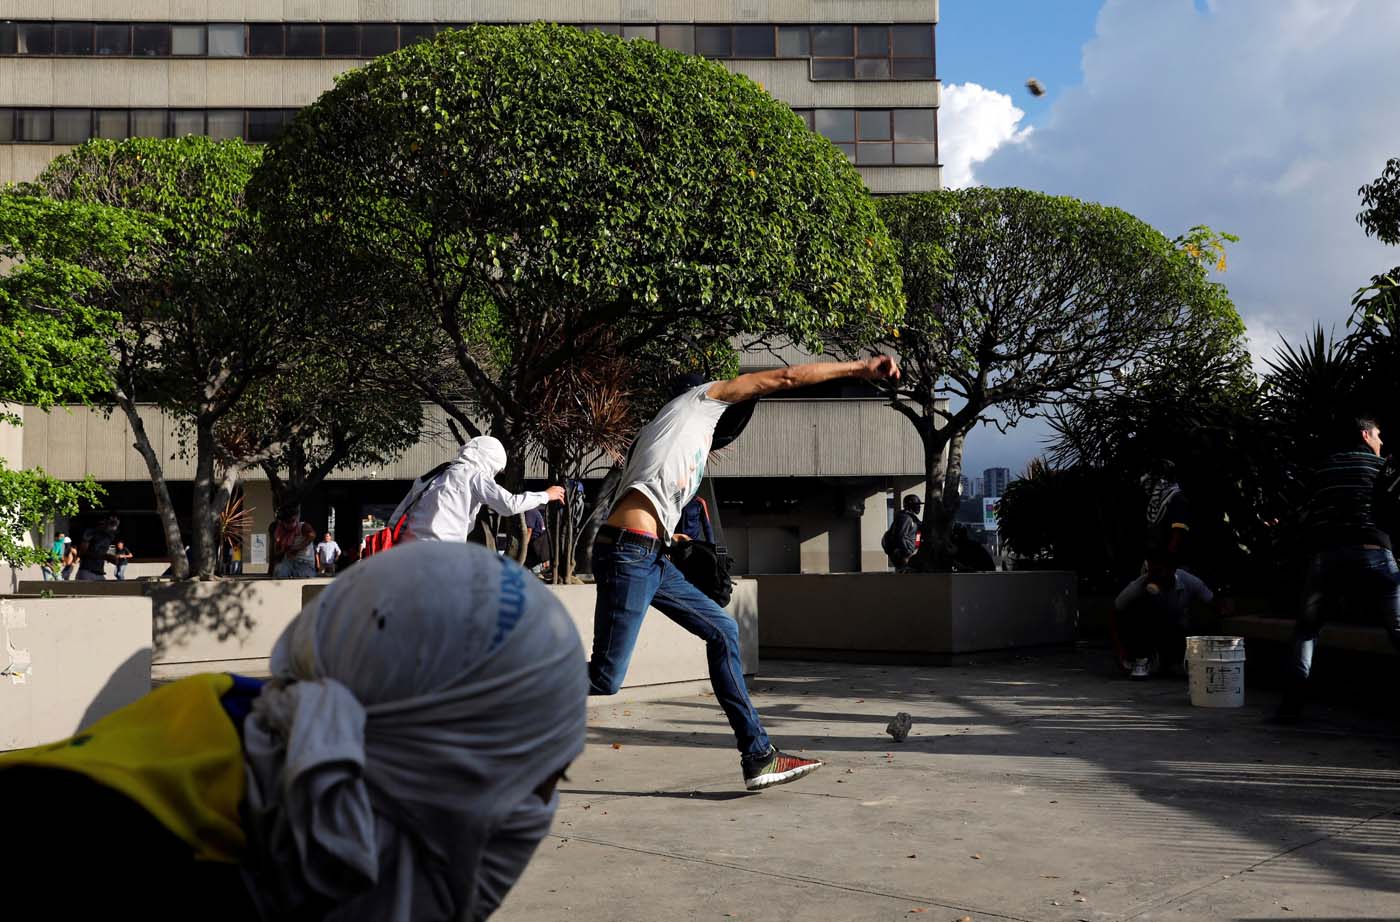 Demonstrators hurl stones during clashes with security forces at a rally against Venezuelan President Nicolas Maduro's government in Caracas, Venezuela, July 6, 2017. REUTERS/Andres Martinez Casares